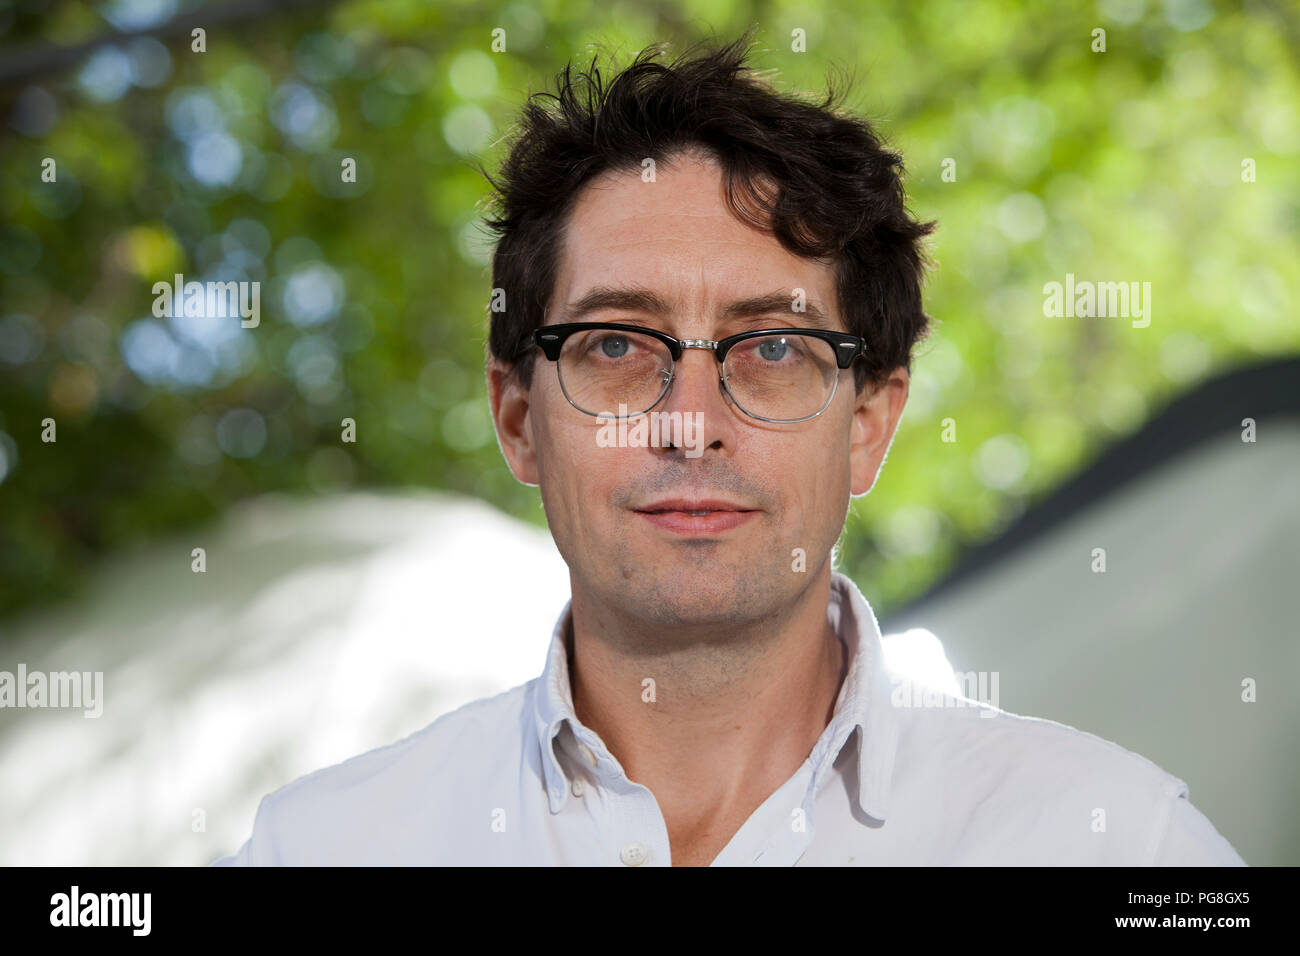 Edinburgh, UK. 24th August, 2018. Sam Leith is an English author, journalist and literary editor of The Spectator. Pictured at the Edinburgh International Book Festival. Edinburgh, Scotland.  Picture by Gary Doak / Alamy Live News Stock Photo